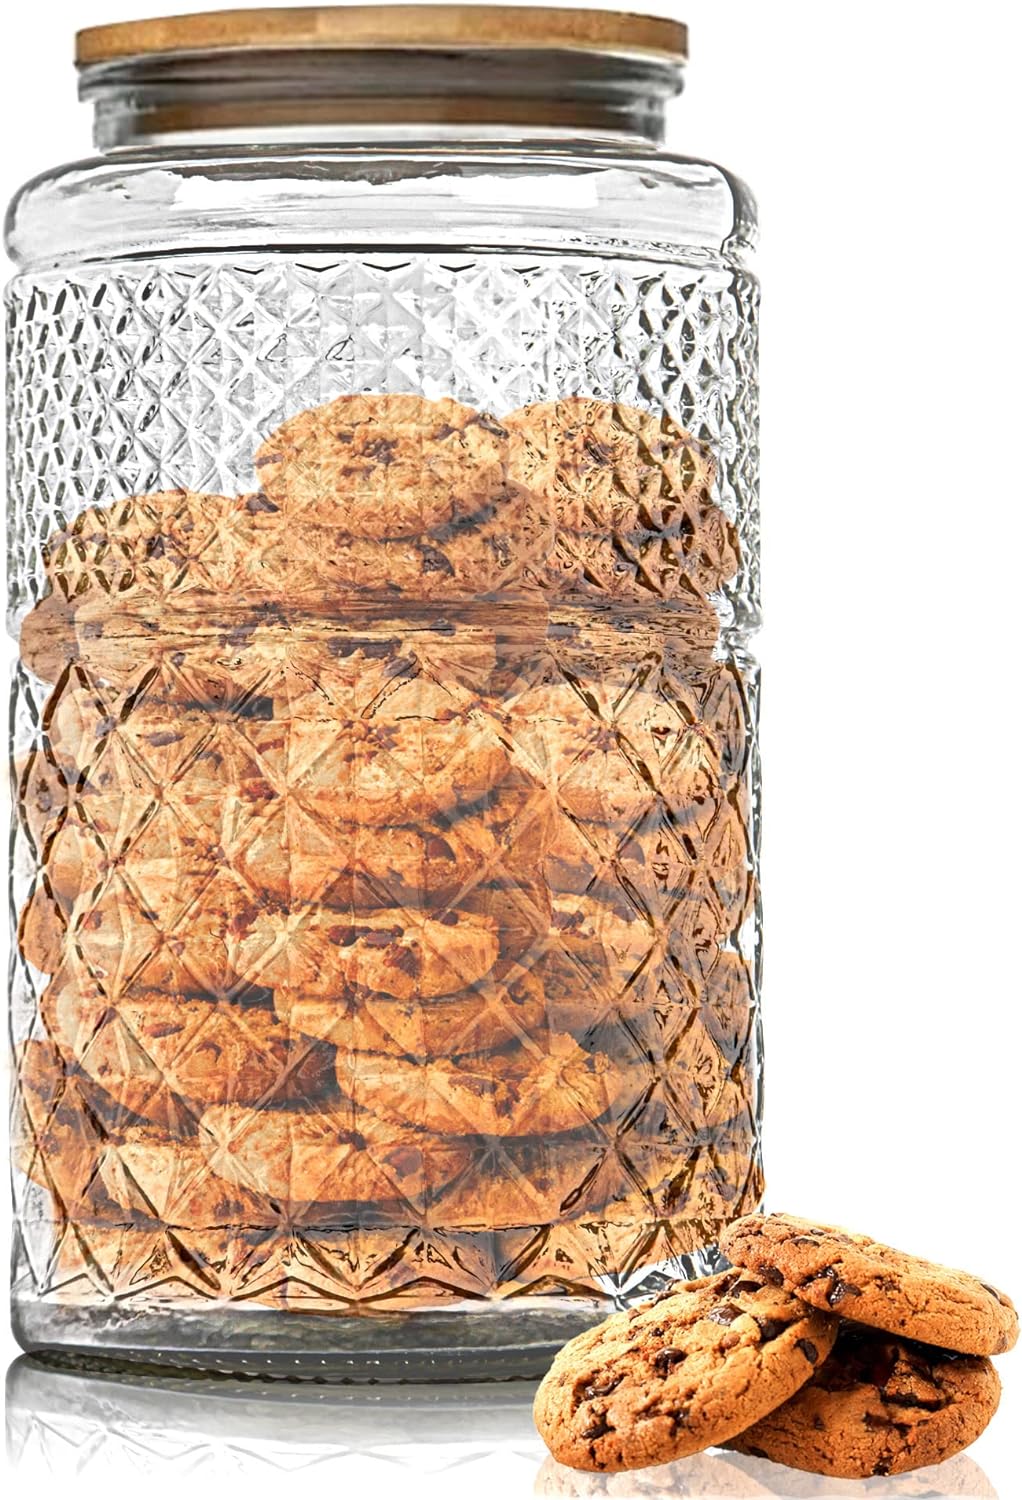 High Quality Cookie Jar 75.½ Ounce Glass Jar (2 Pack) With Plastic